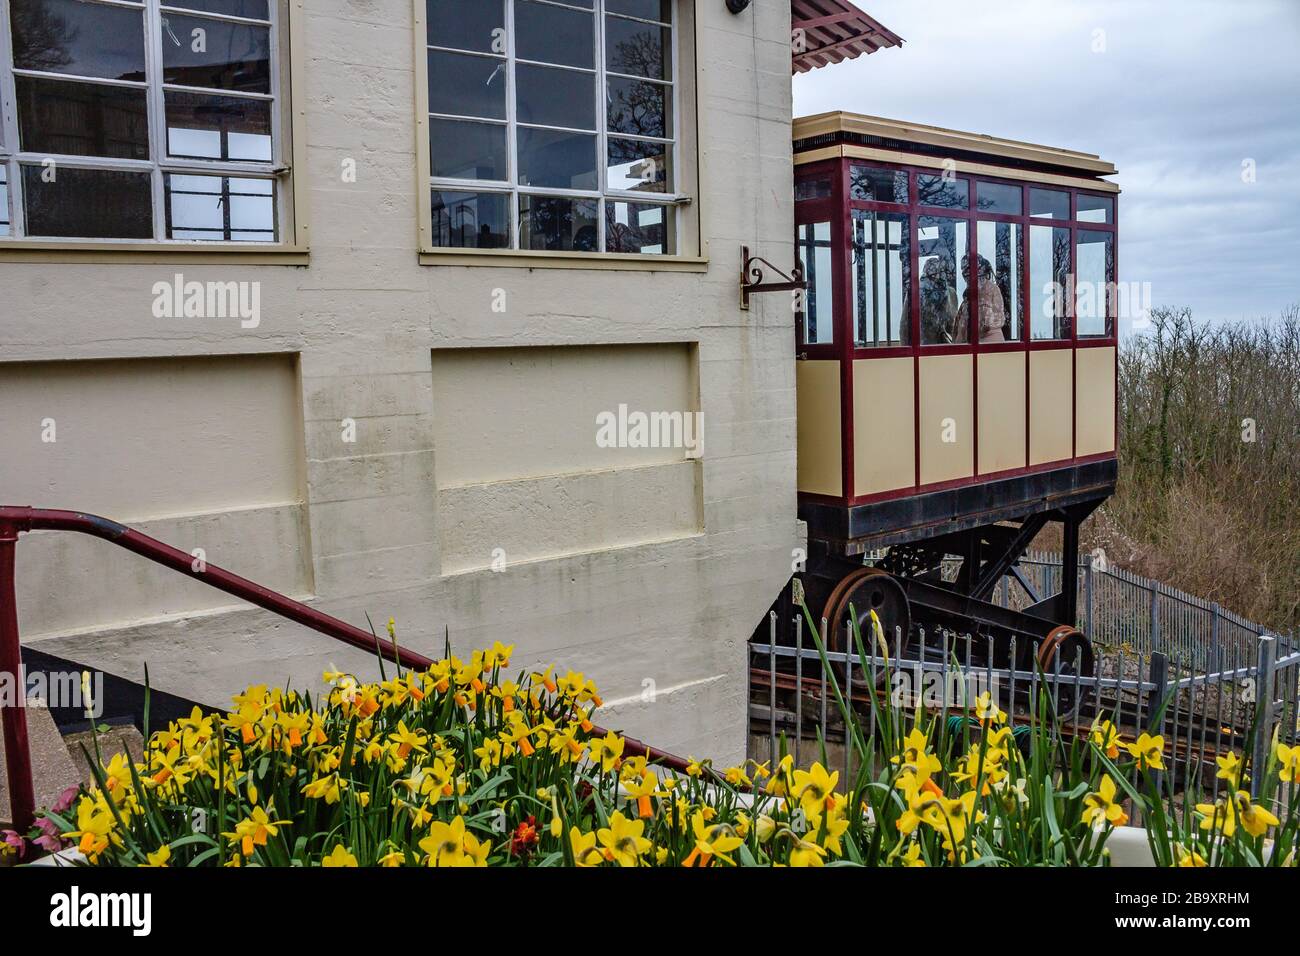 Babbacombe Cliff Railway, a seaside funicular built in 1926 and going up and down a steep cliff to Oddicombe Beach, Torquay, Devon, UK. March 2018. Stock Photo